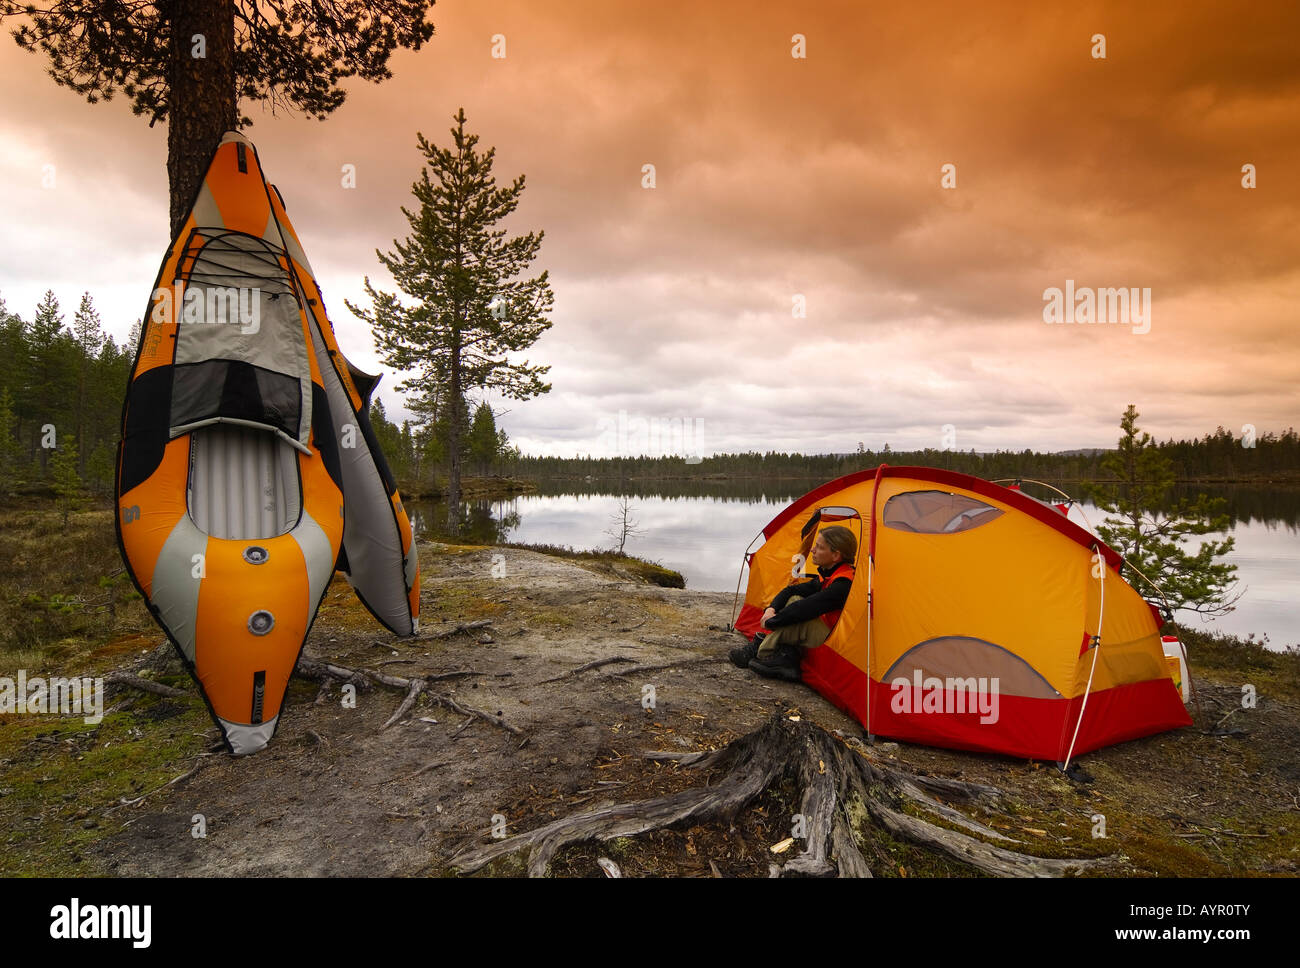 Two inflatable kayaks and a woman sitting in front of a tent at